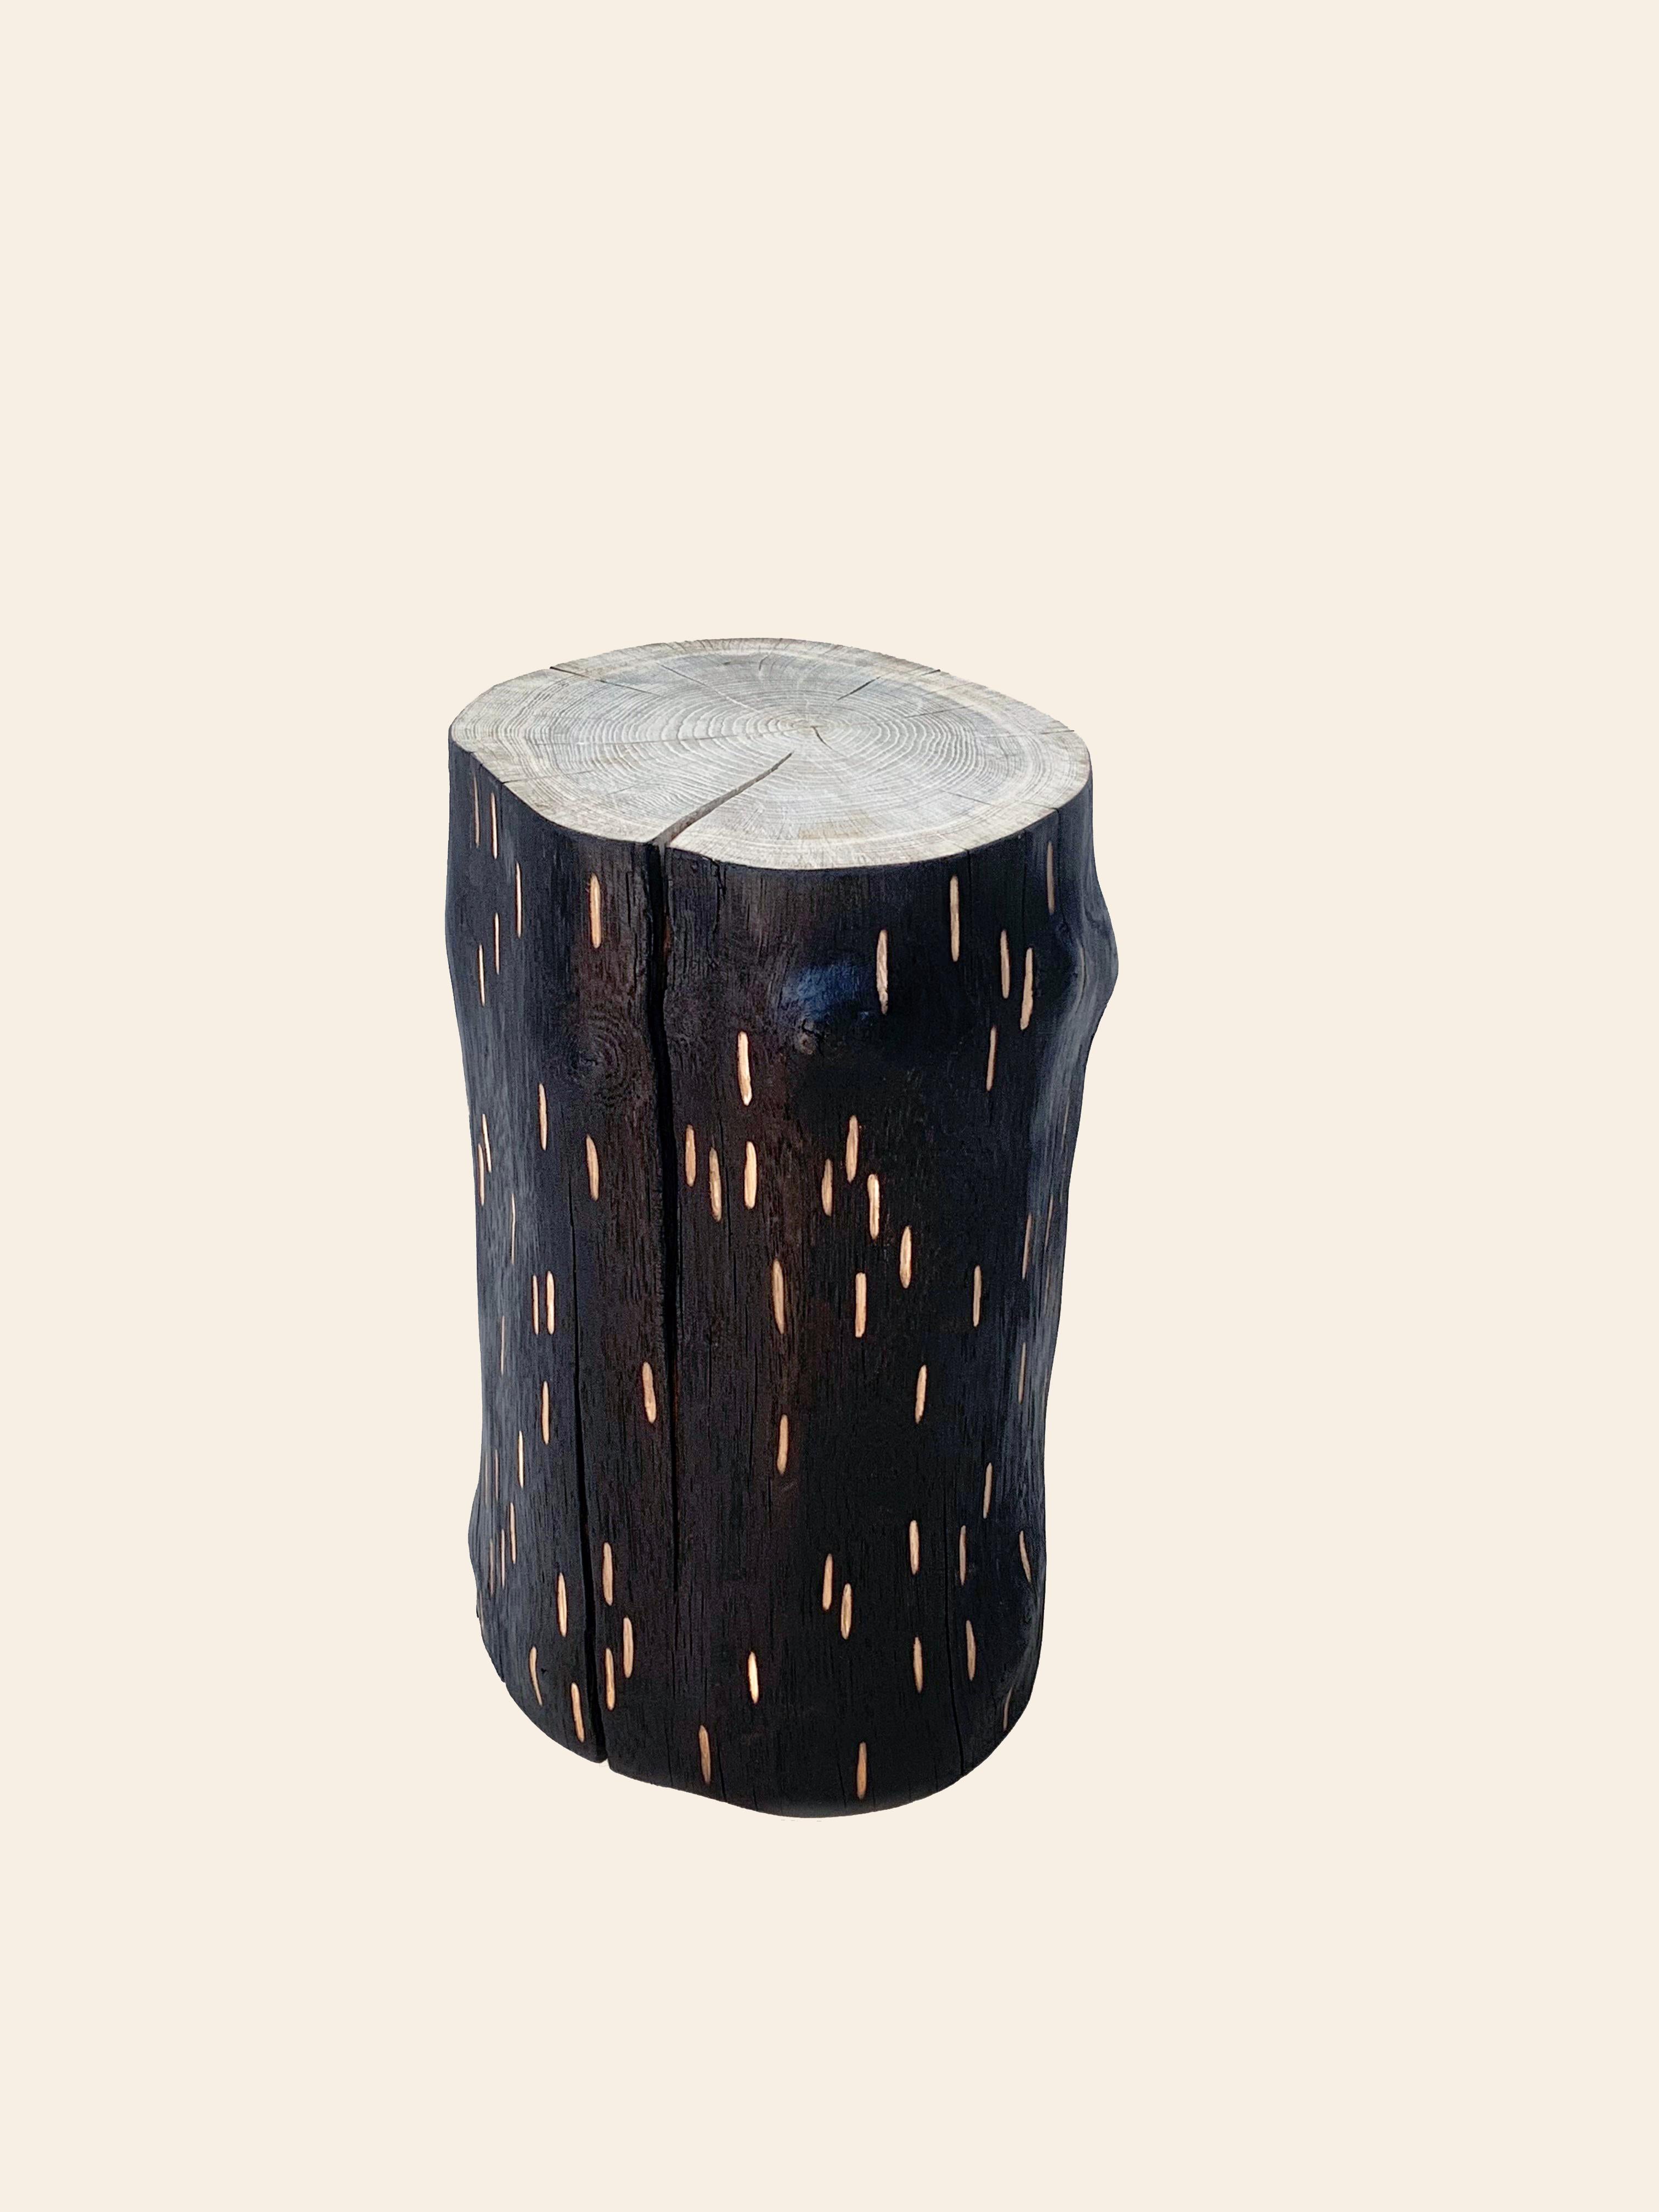 'Barking Up The Wrong Log' charred oak stool with hand carved markings 1